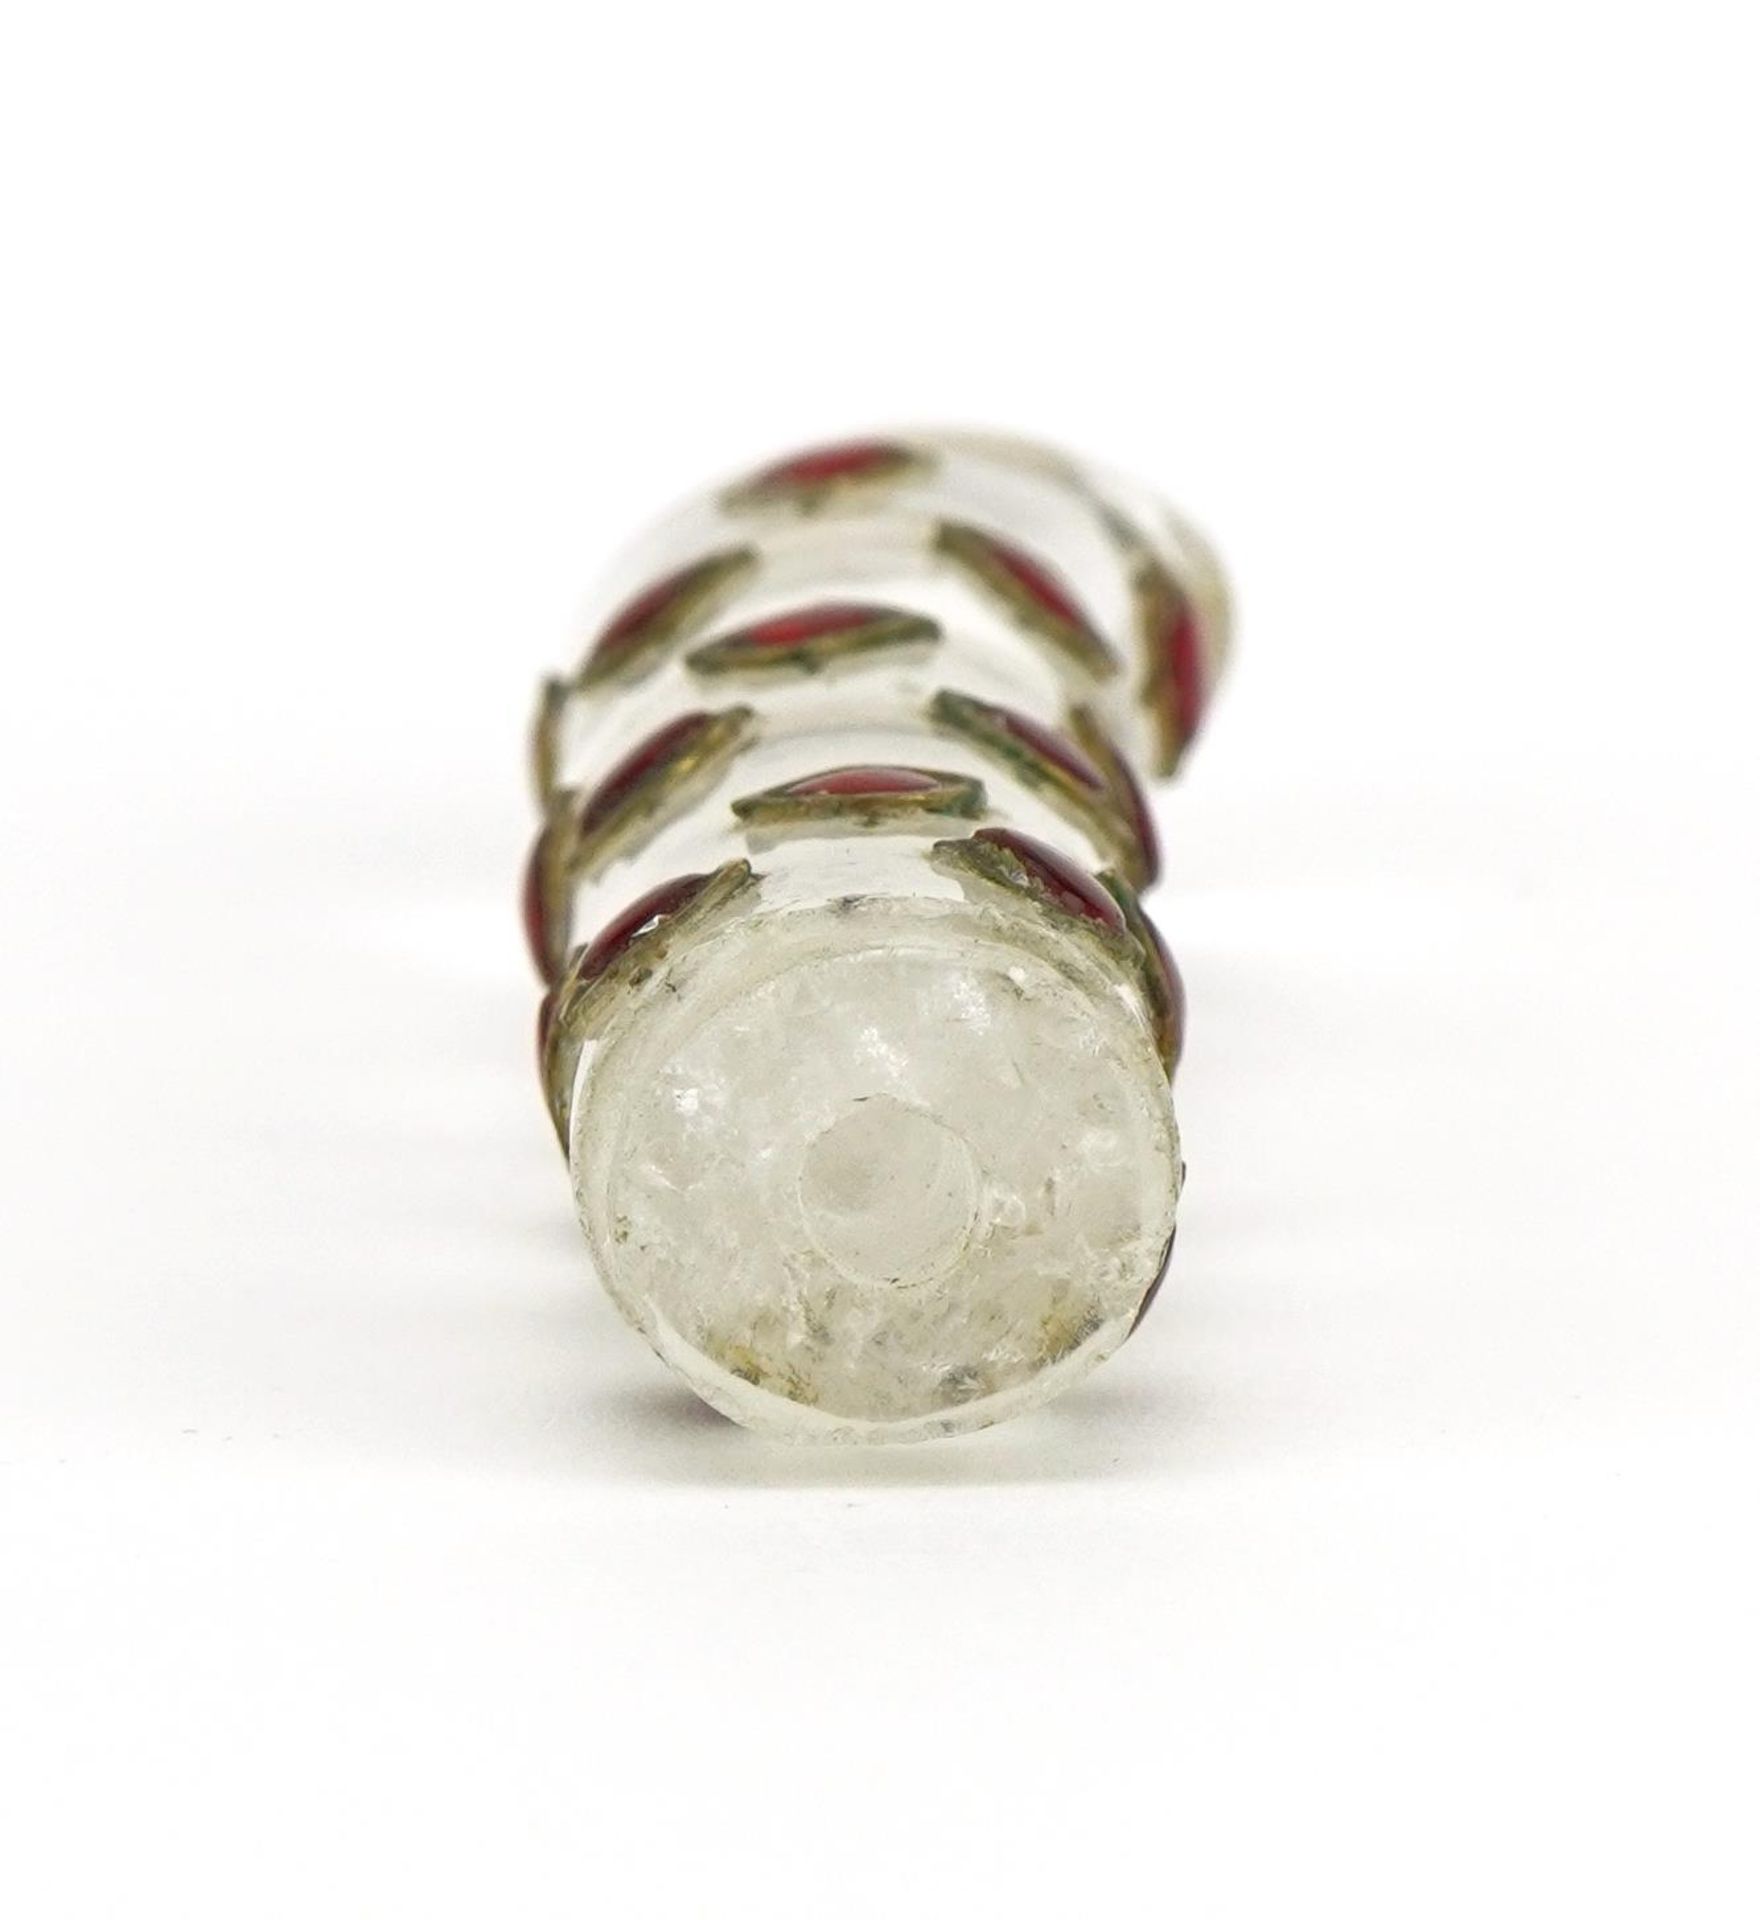 Islamic rock crystal dagger handle inset with red cabochons, 9cm in length - Image 3 of 3